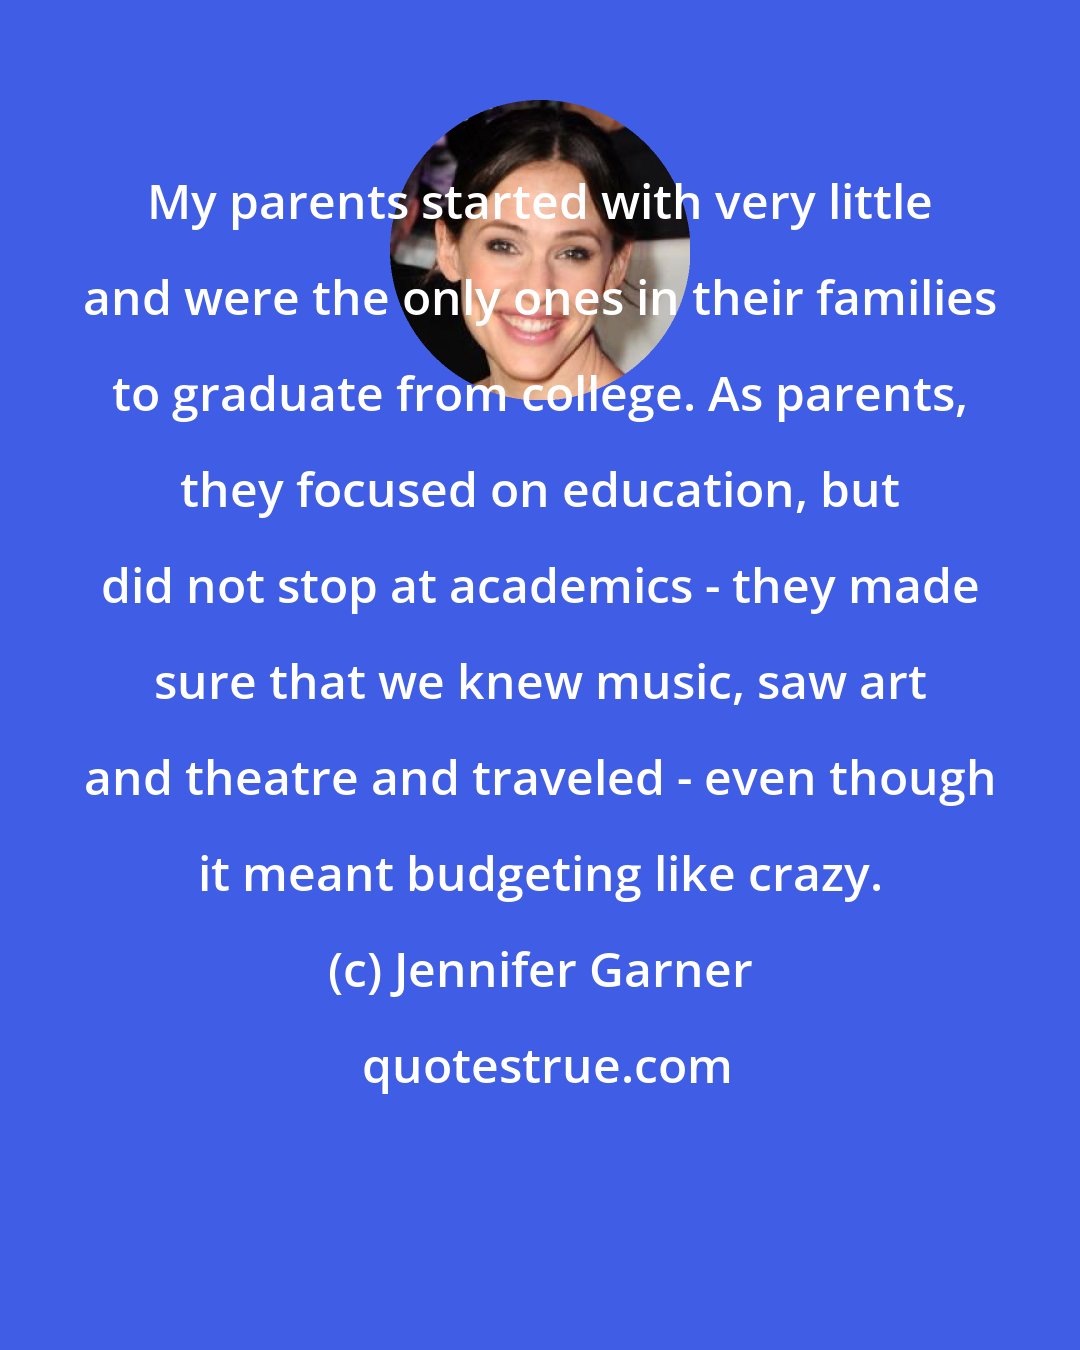 Jennifer Garner: My parents started with very little and were the only ones in their families to graduate from college. As parents, they focused on education, but did not stop at academics - they made sure that we knew music, saw art and theatre and traveled - even though it meant budgeting like crazy.